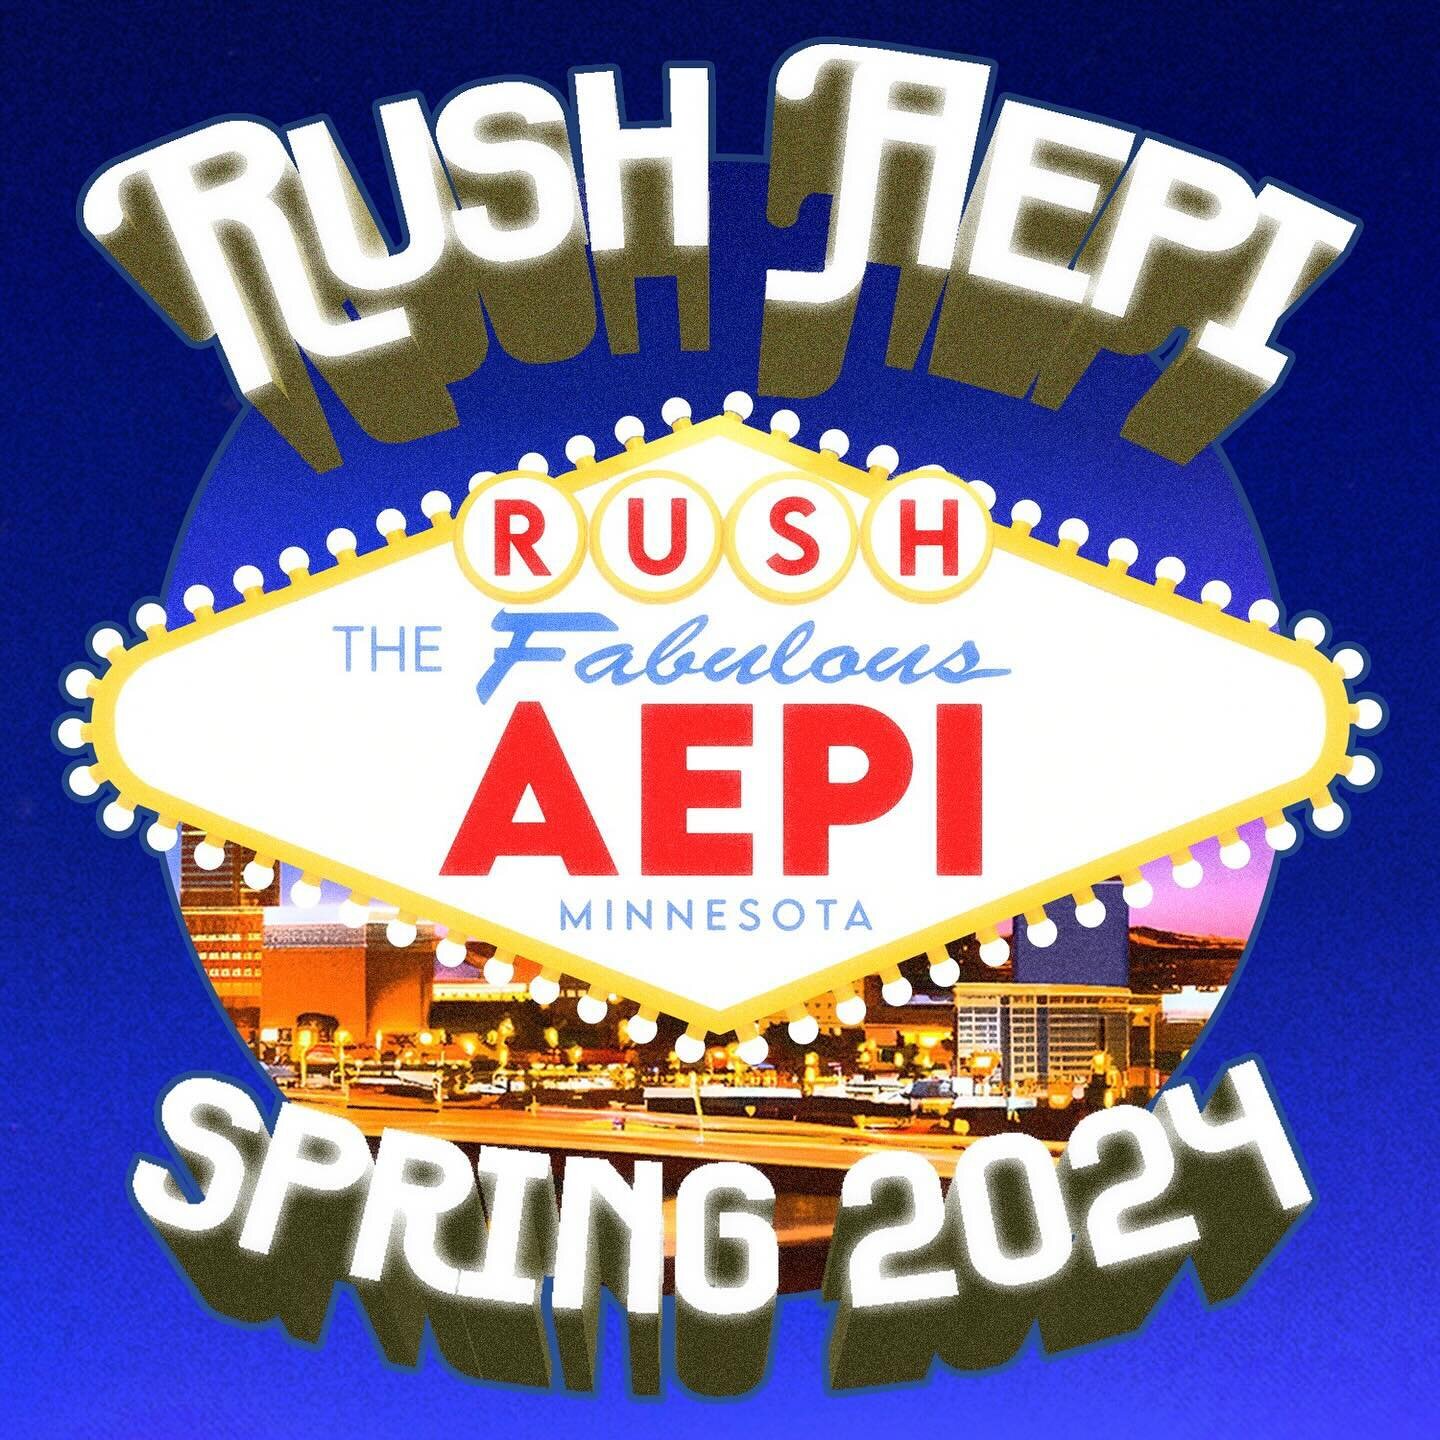 We at AEPi are betting big on this semester&rsquo;s rush season! Like Vegas, we have many open slots available, so don&rsquo;t gamble on your poker face, and be sure to reach out with any questions you may have!